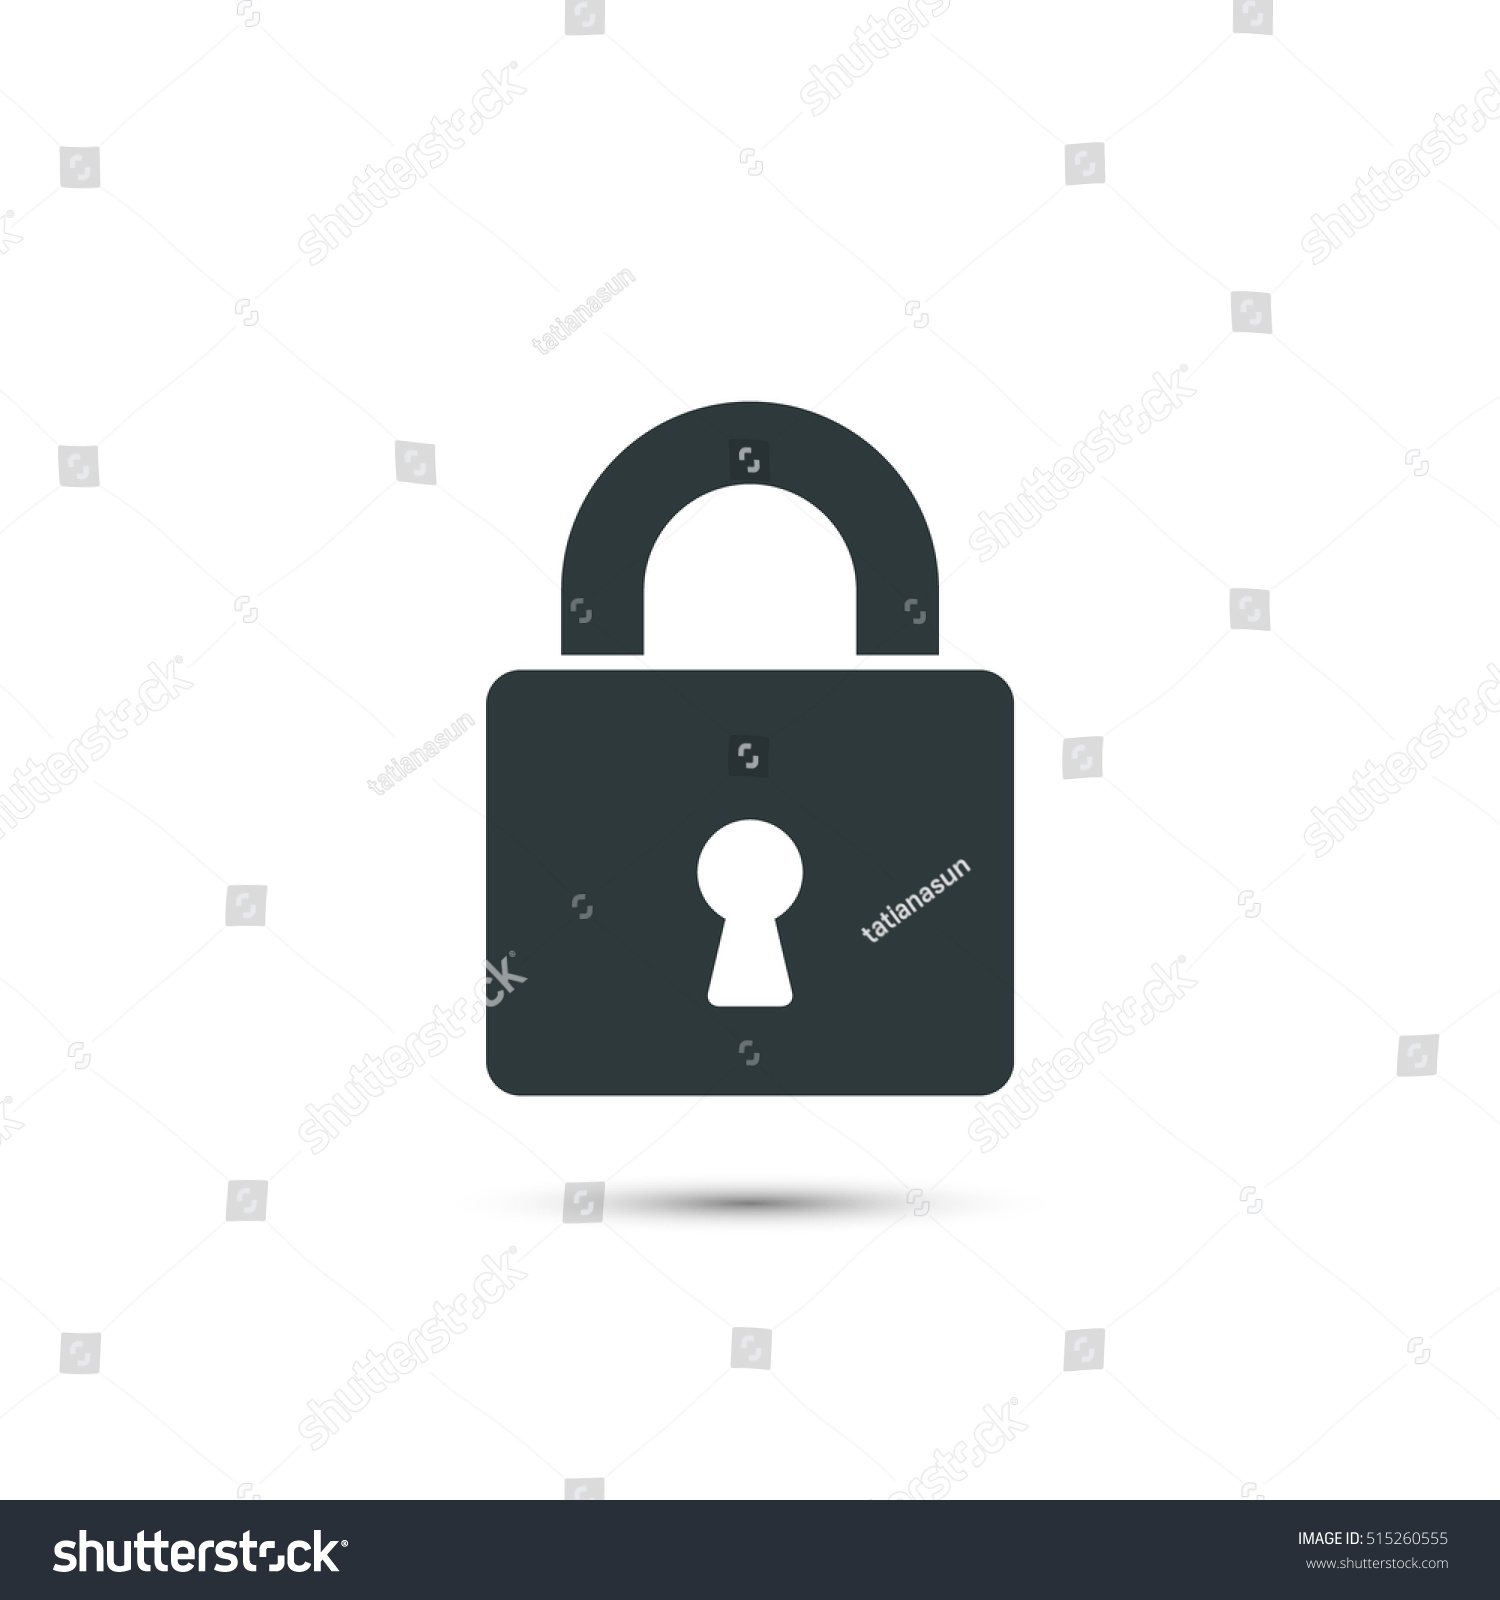 Lock Vectors, Photos and PSD files | Free Download